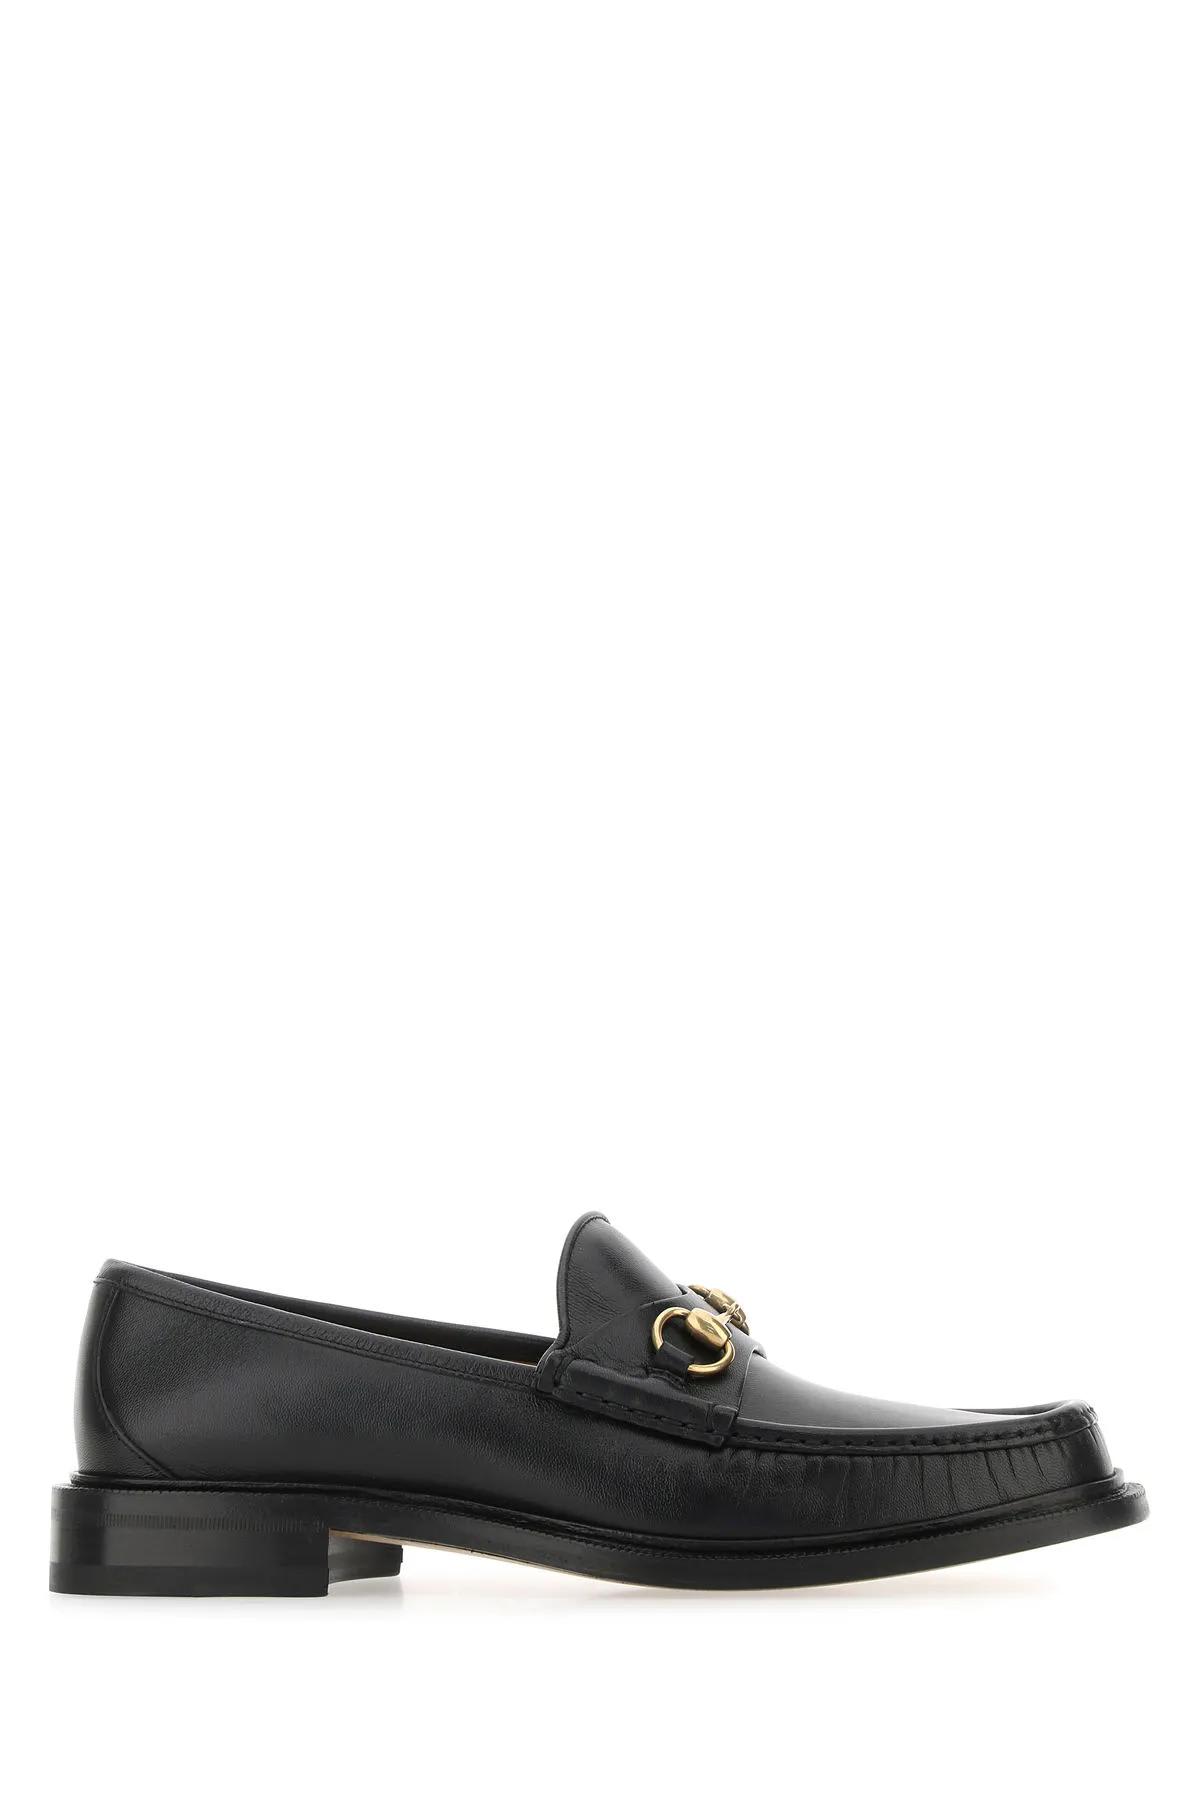 Shop Gucci Black Leather Loafers